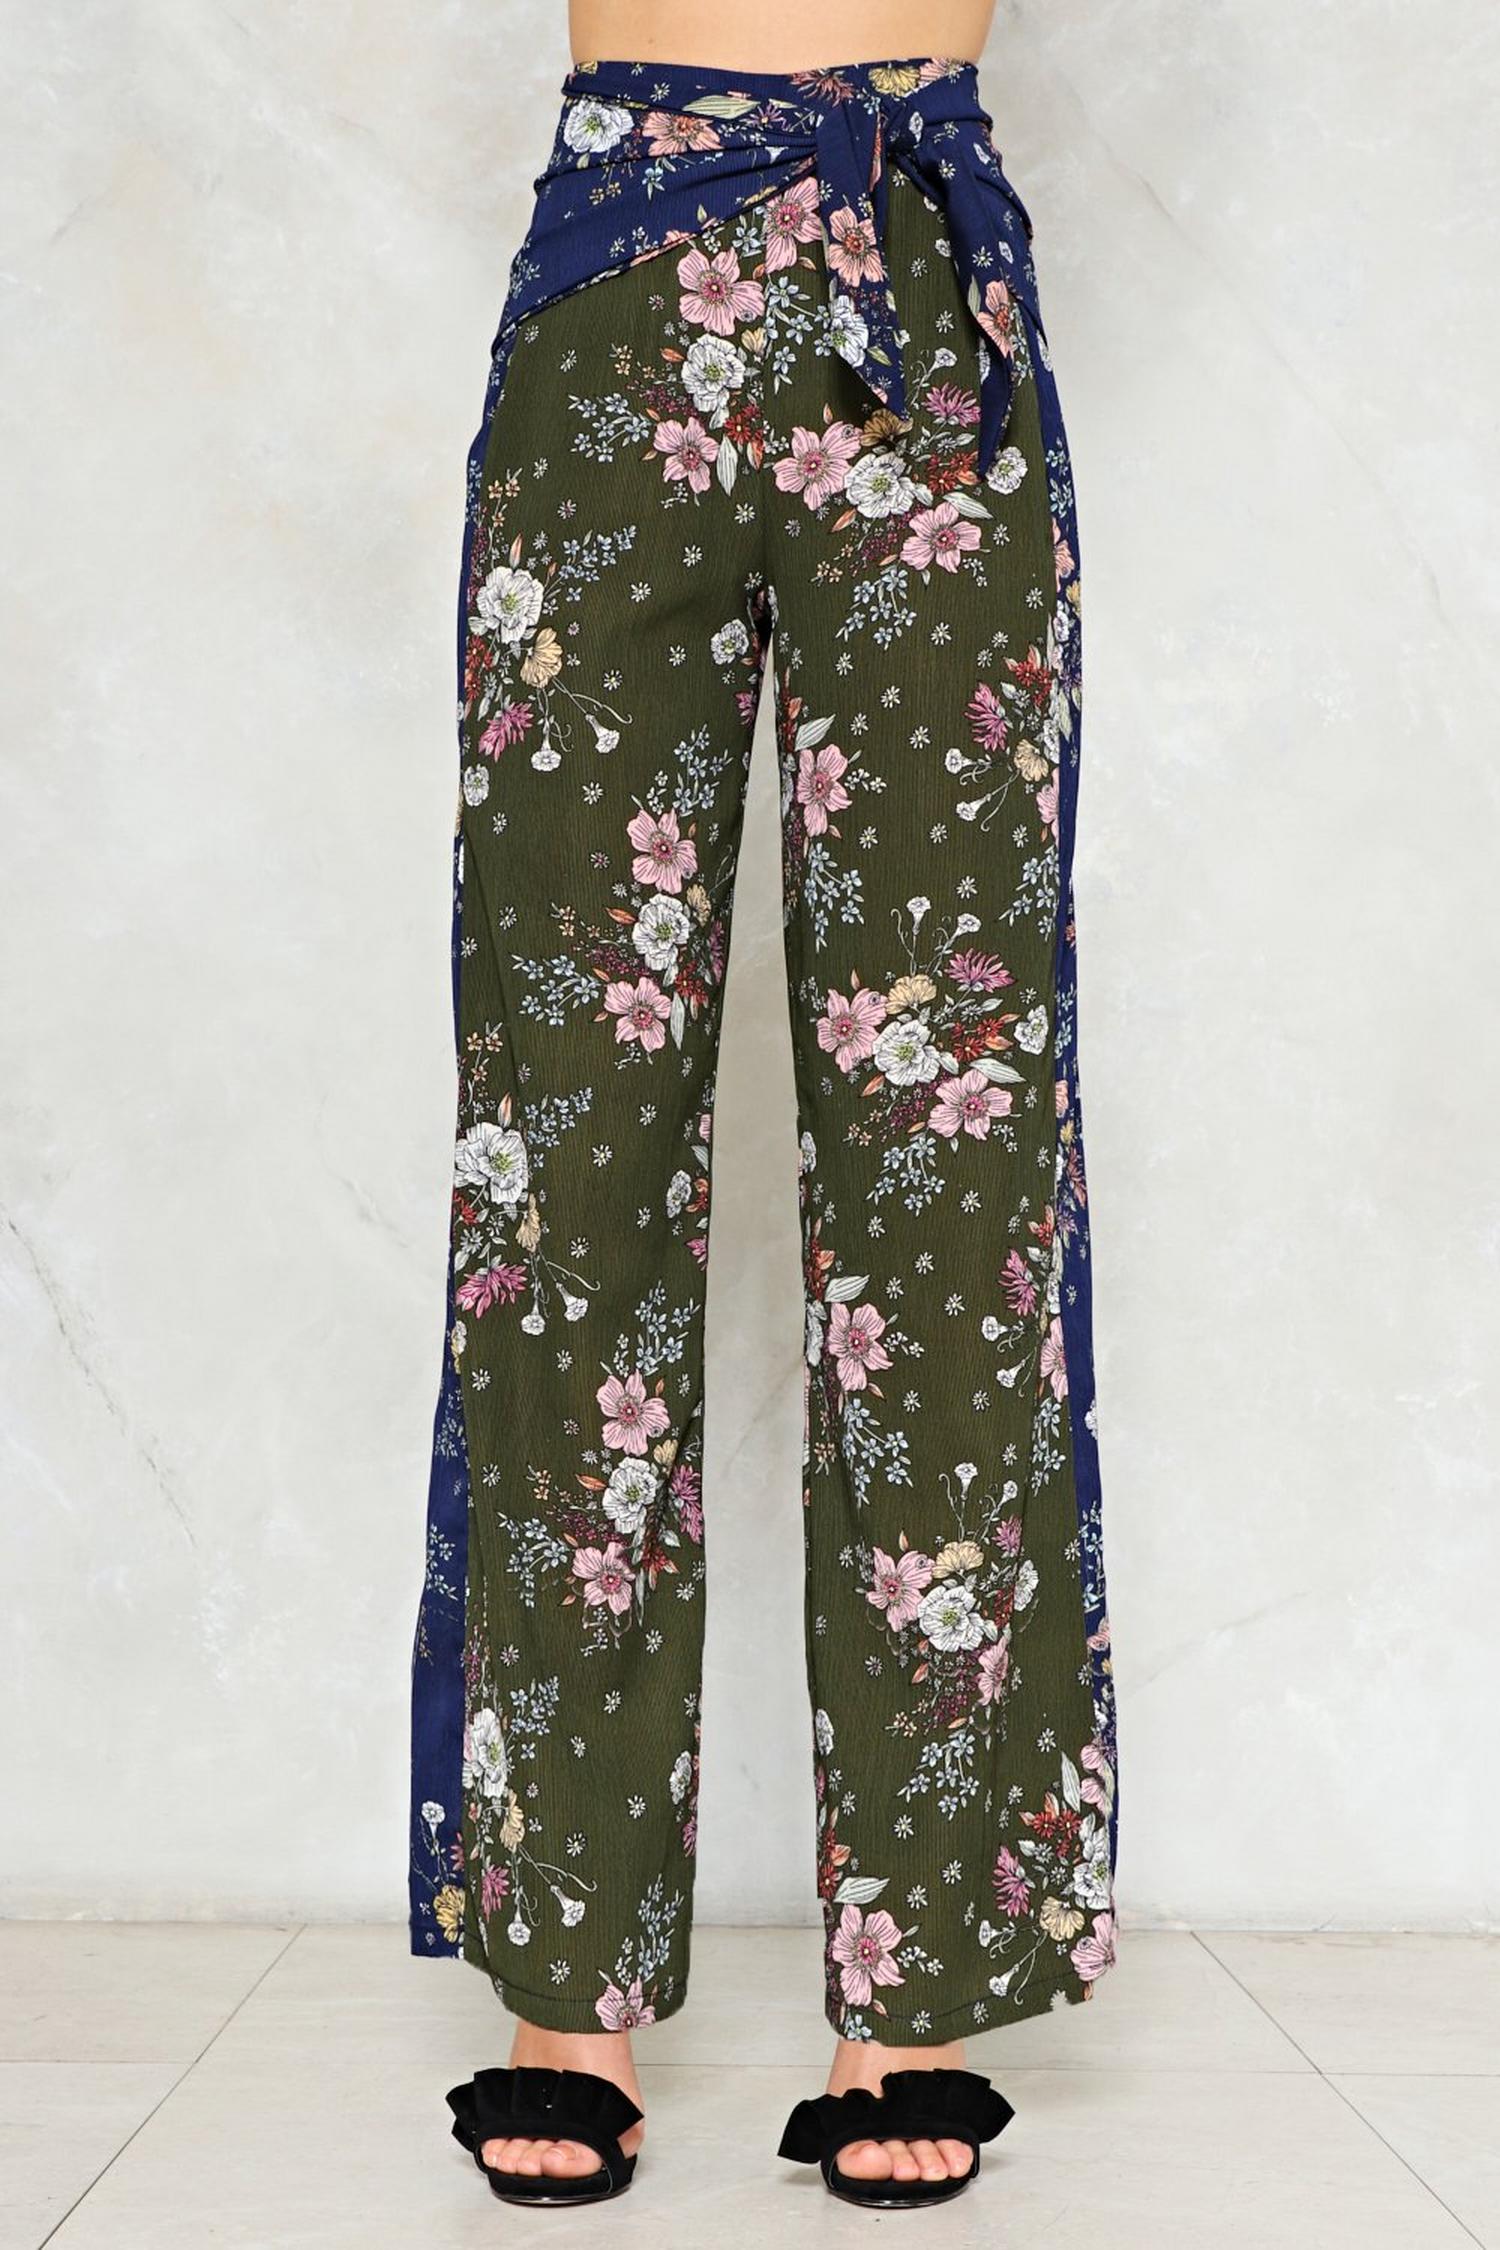 First Day of Spring Floral Pants | Nasty Gal